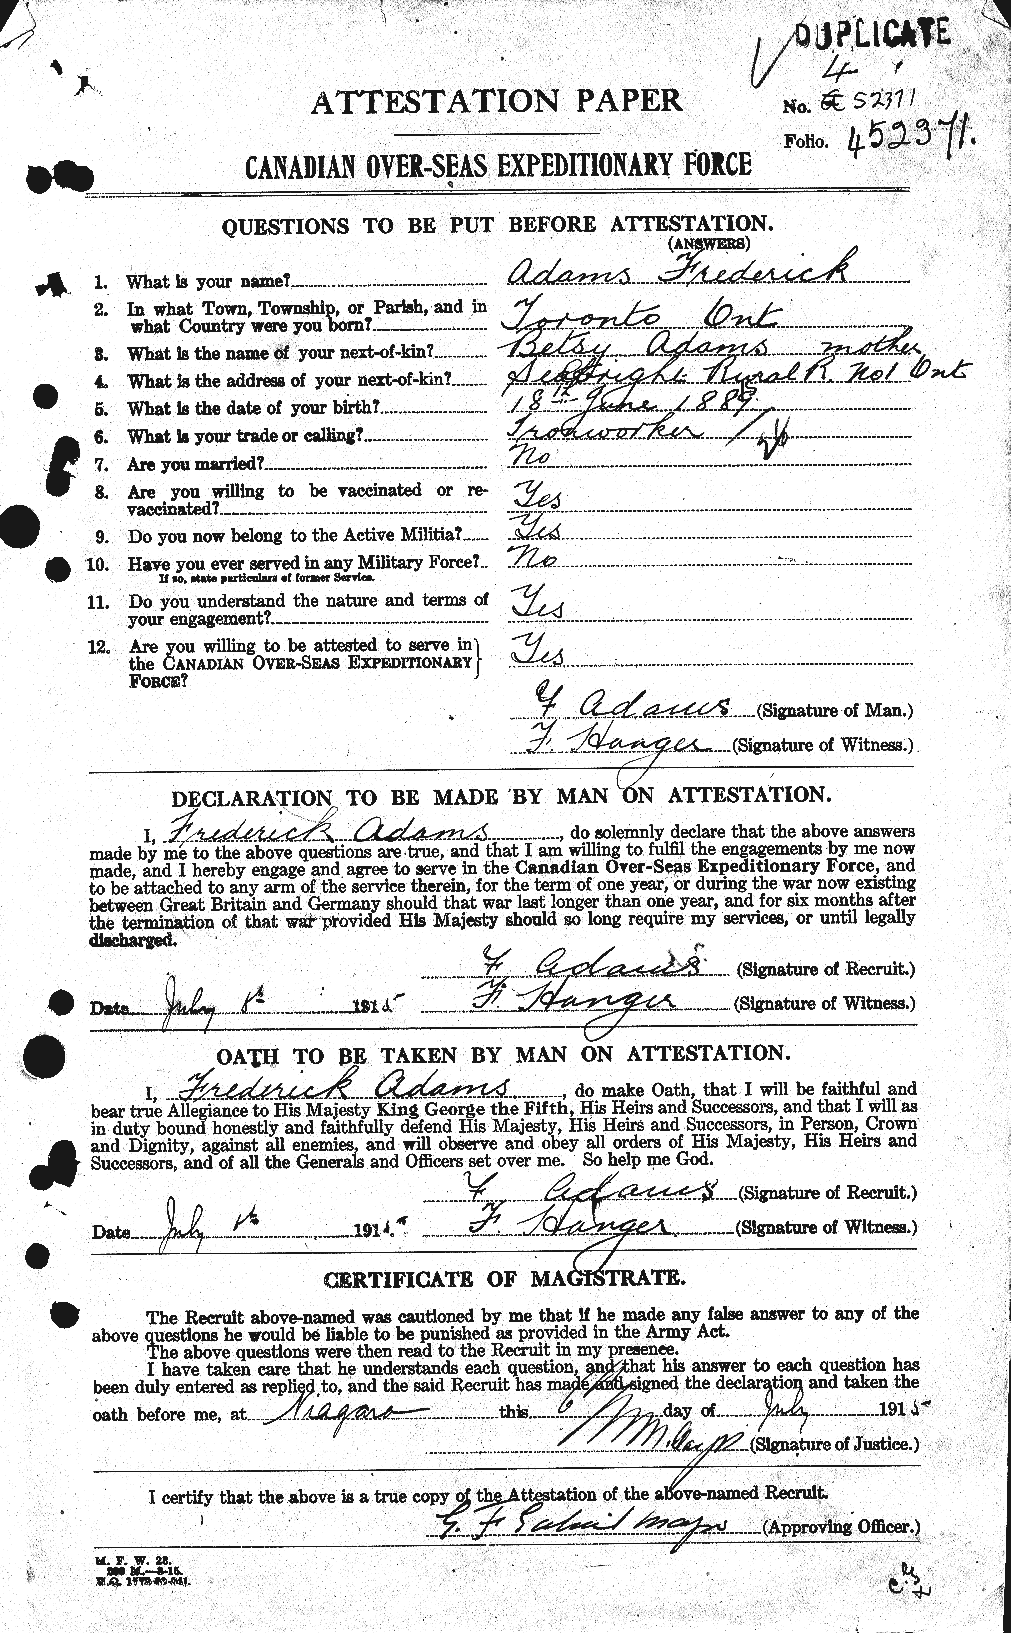 Personnel Records of the First World War - CEF 202684a